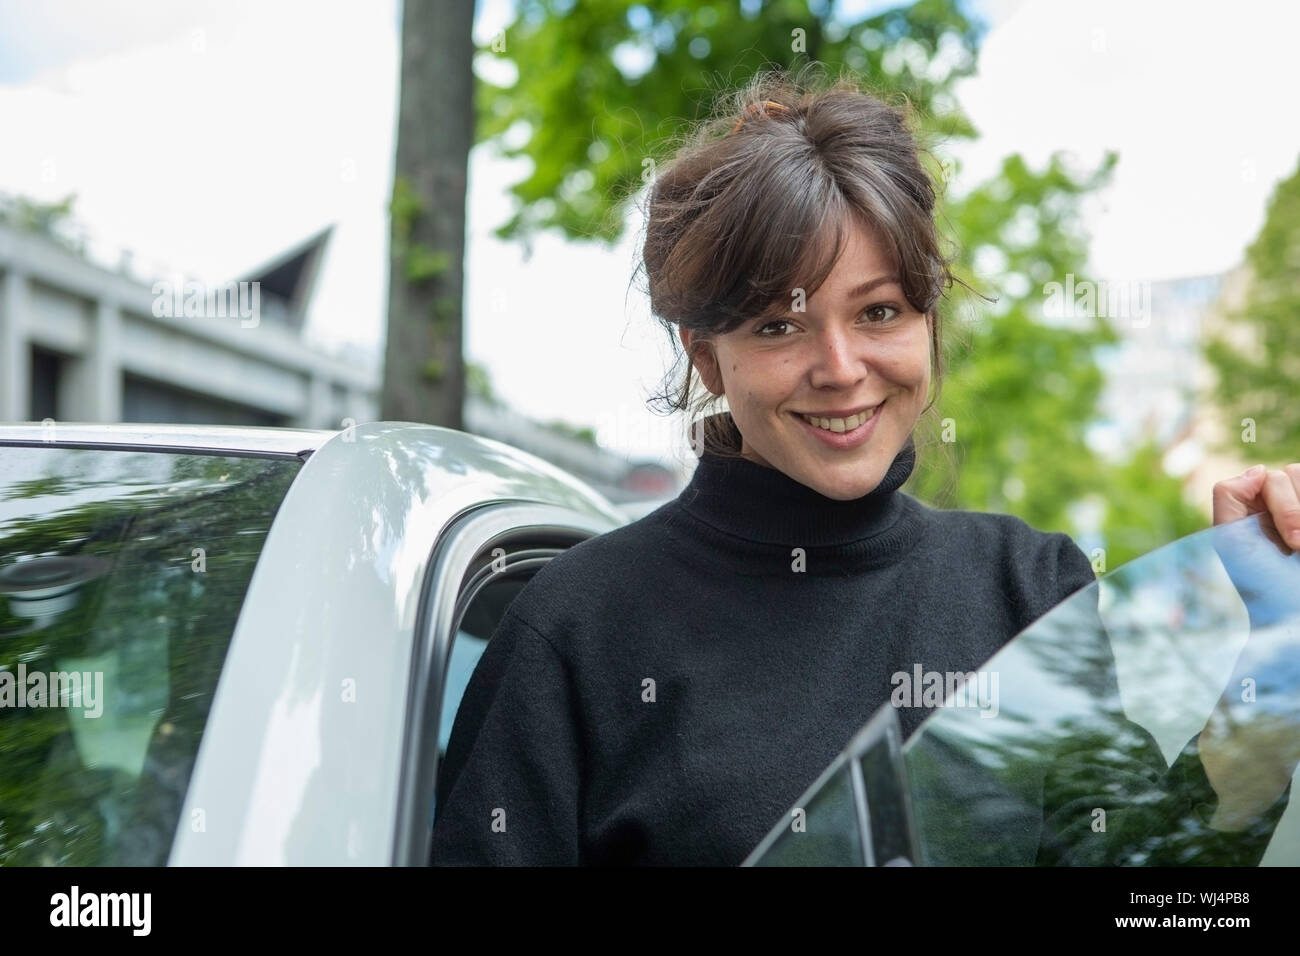 Portrait smiling young woman standing at car door Stock Photo